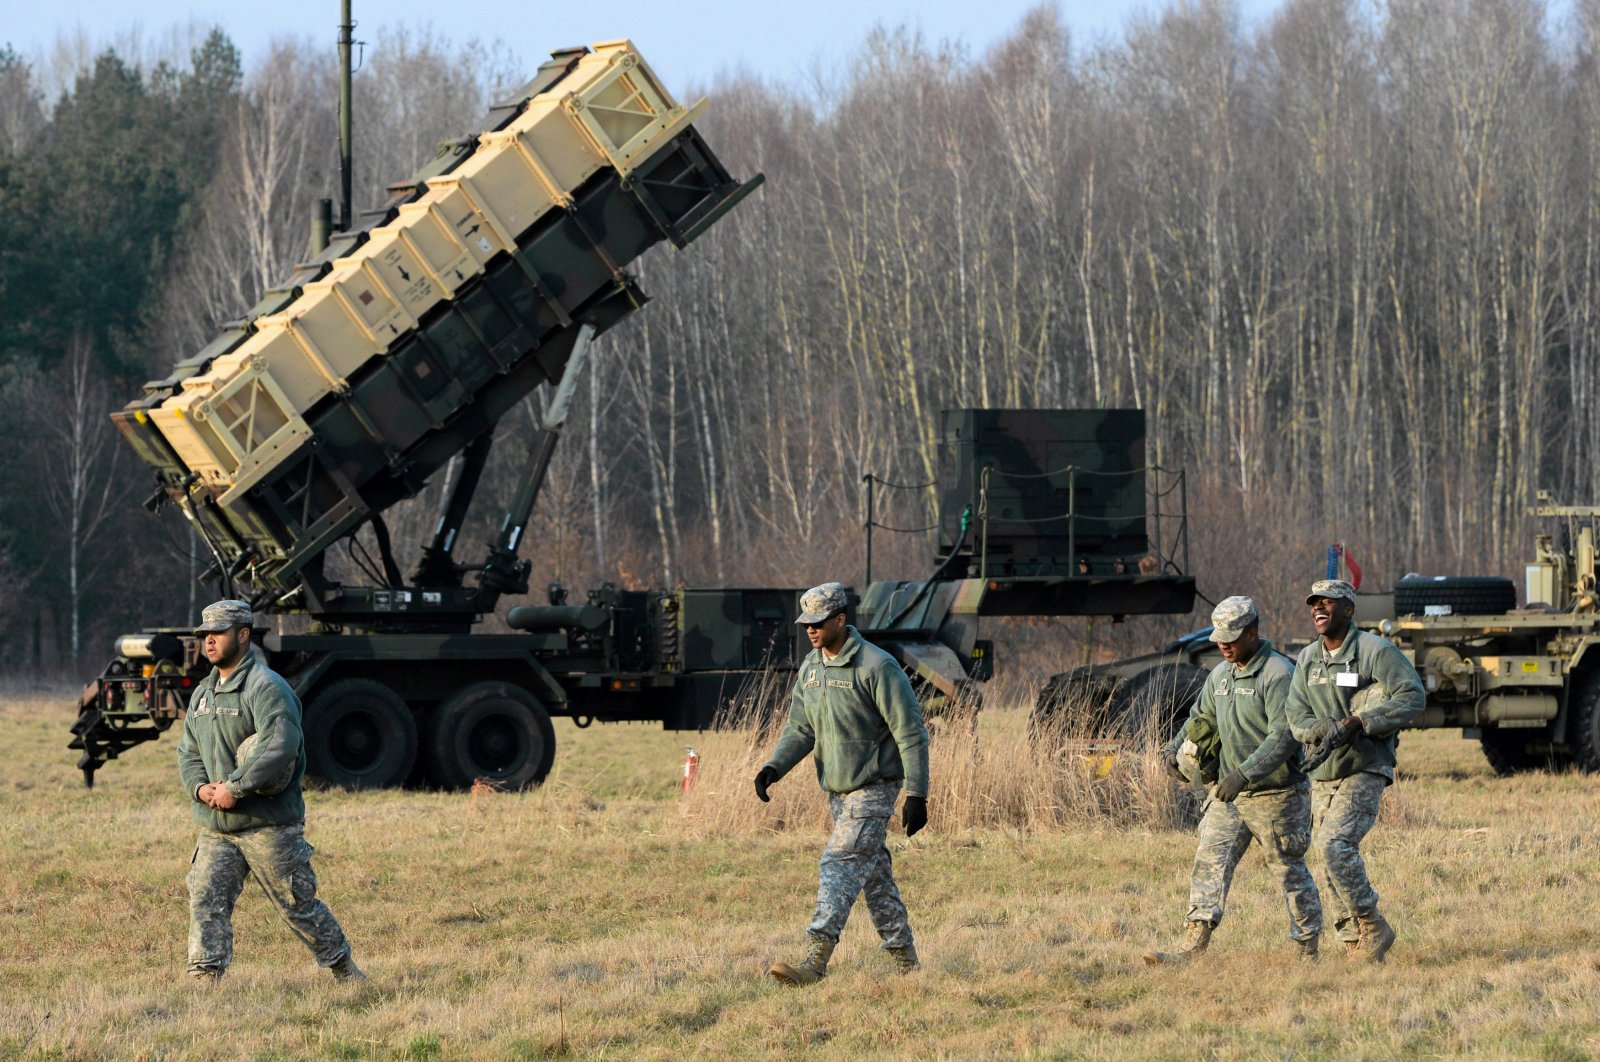 U.S. soldiers walk next to a Patriot missile defense battery during join exercises at the military grouds in Sochaczew, near Warsaw, March 21, 2015. (Reuters Photo)